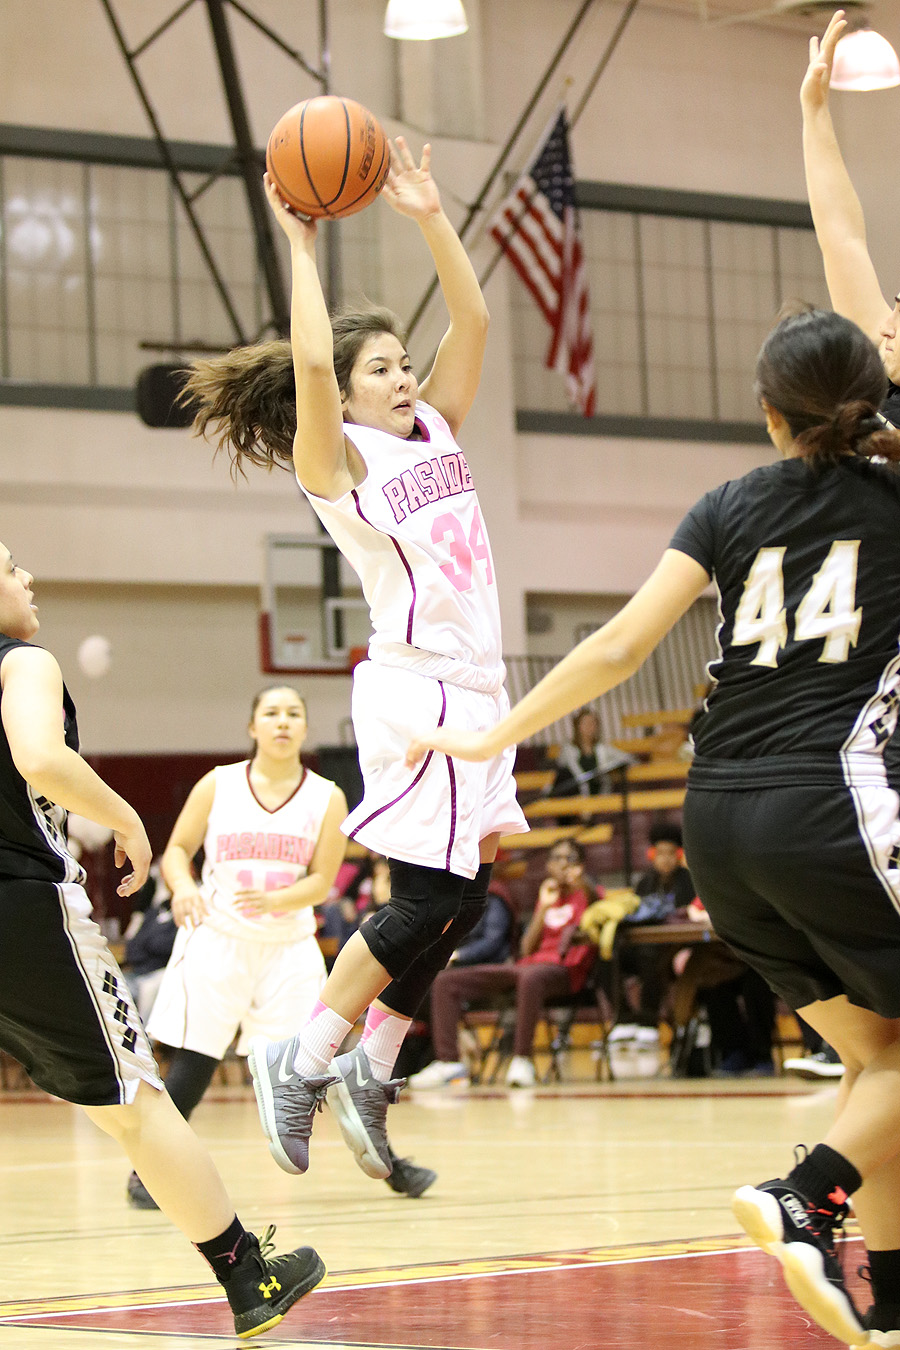 Lancer Elise Ortega, wearing PCC's White/Pink jersey for Coaches v. Cancer Night, attempts a pass against Rio Hondo on Friday night, photo by Richard Quinton.